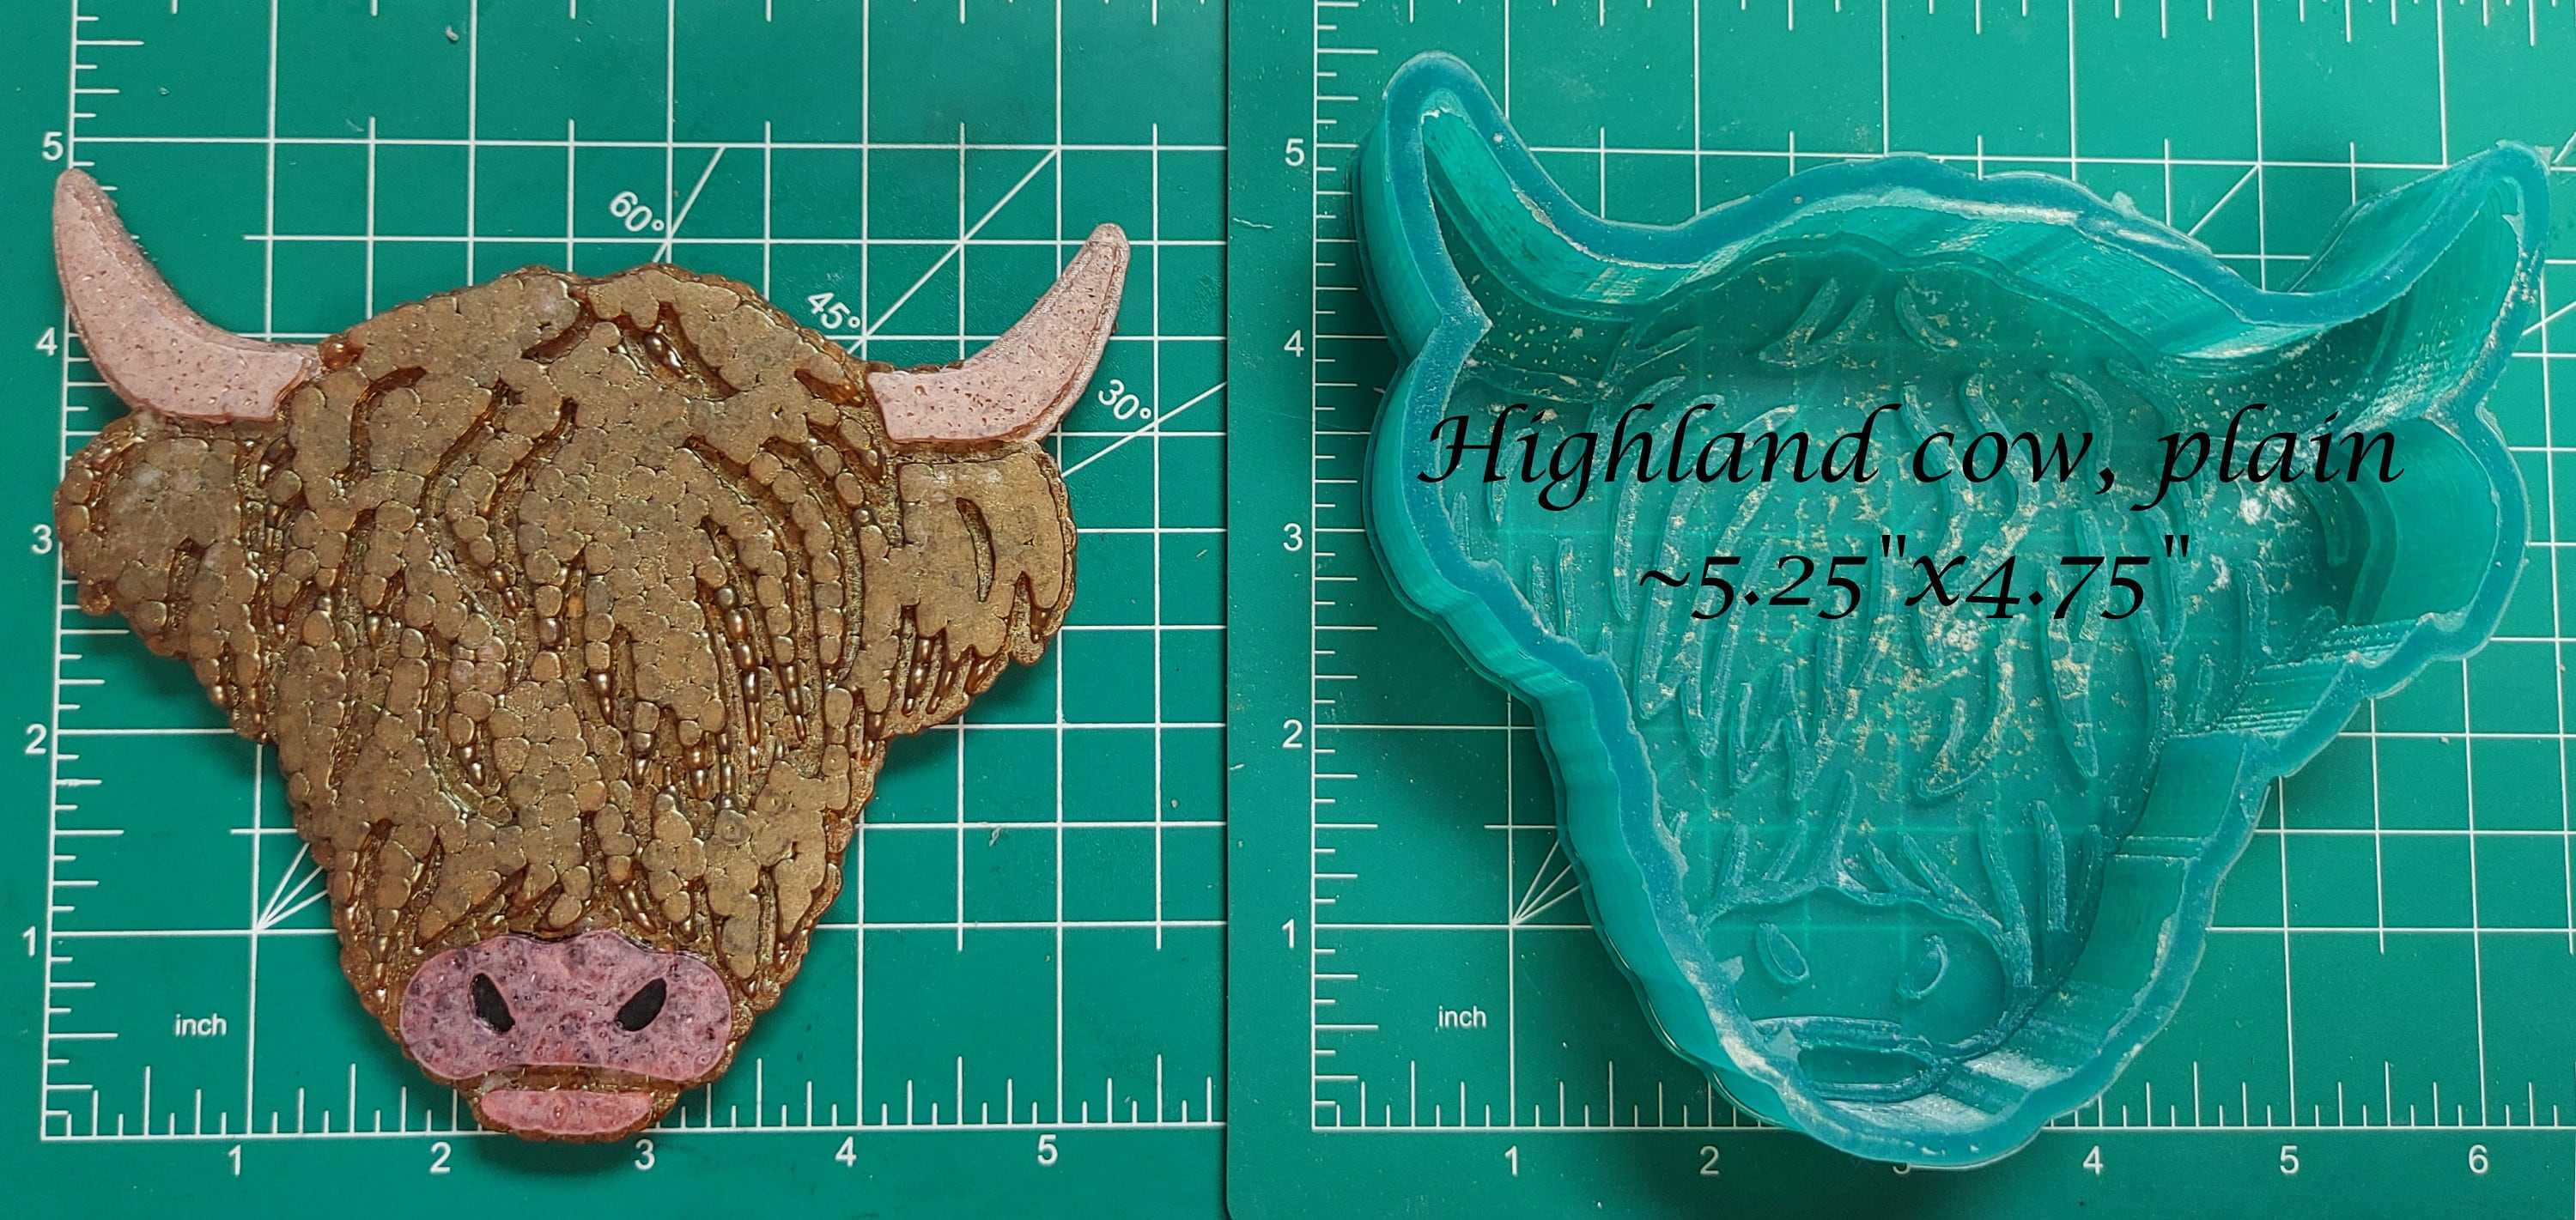 Car Freshie Molds, Highland cow Silicone Mold for Resin Soap Candle